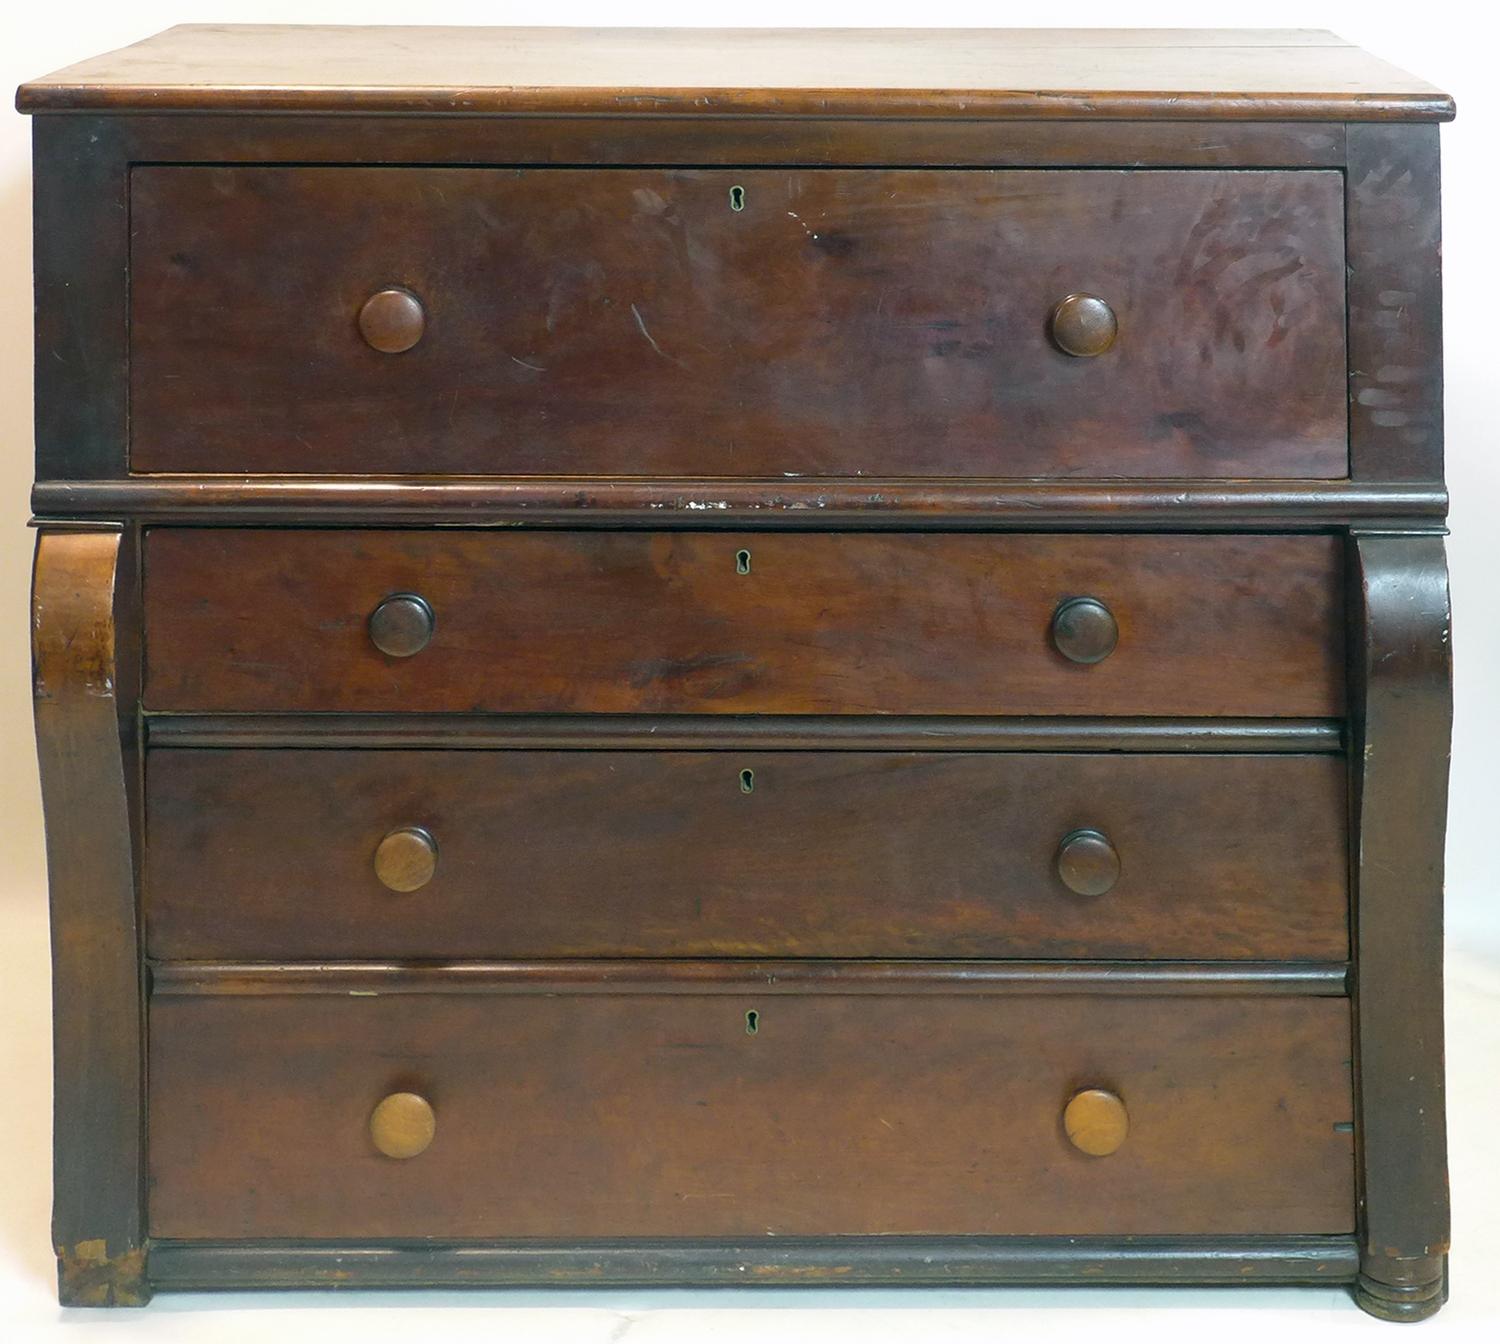 A 19th century Scottish mahogany chest of drawers, H.101 W.110 D.56cm